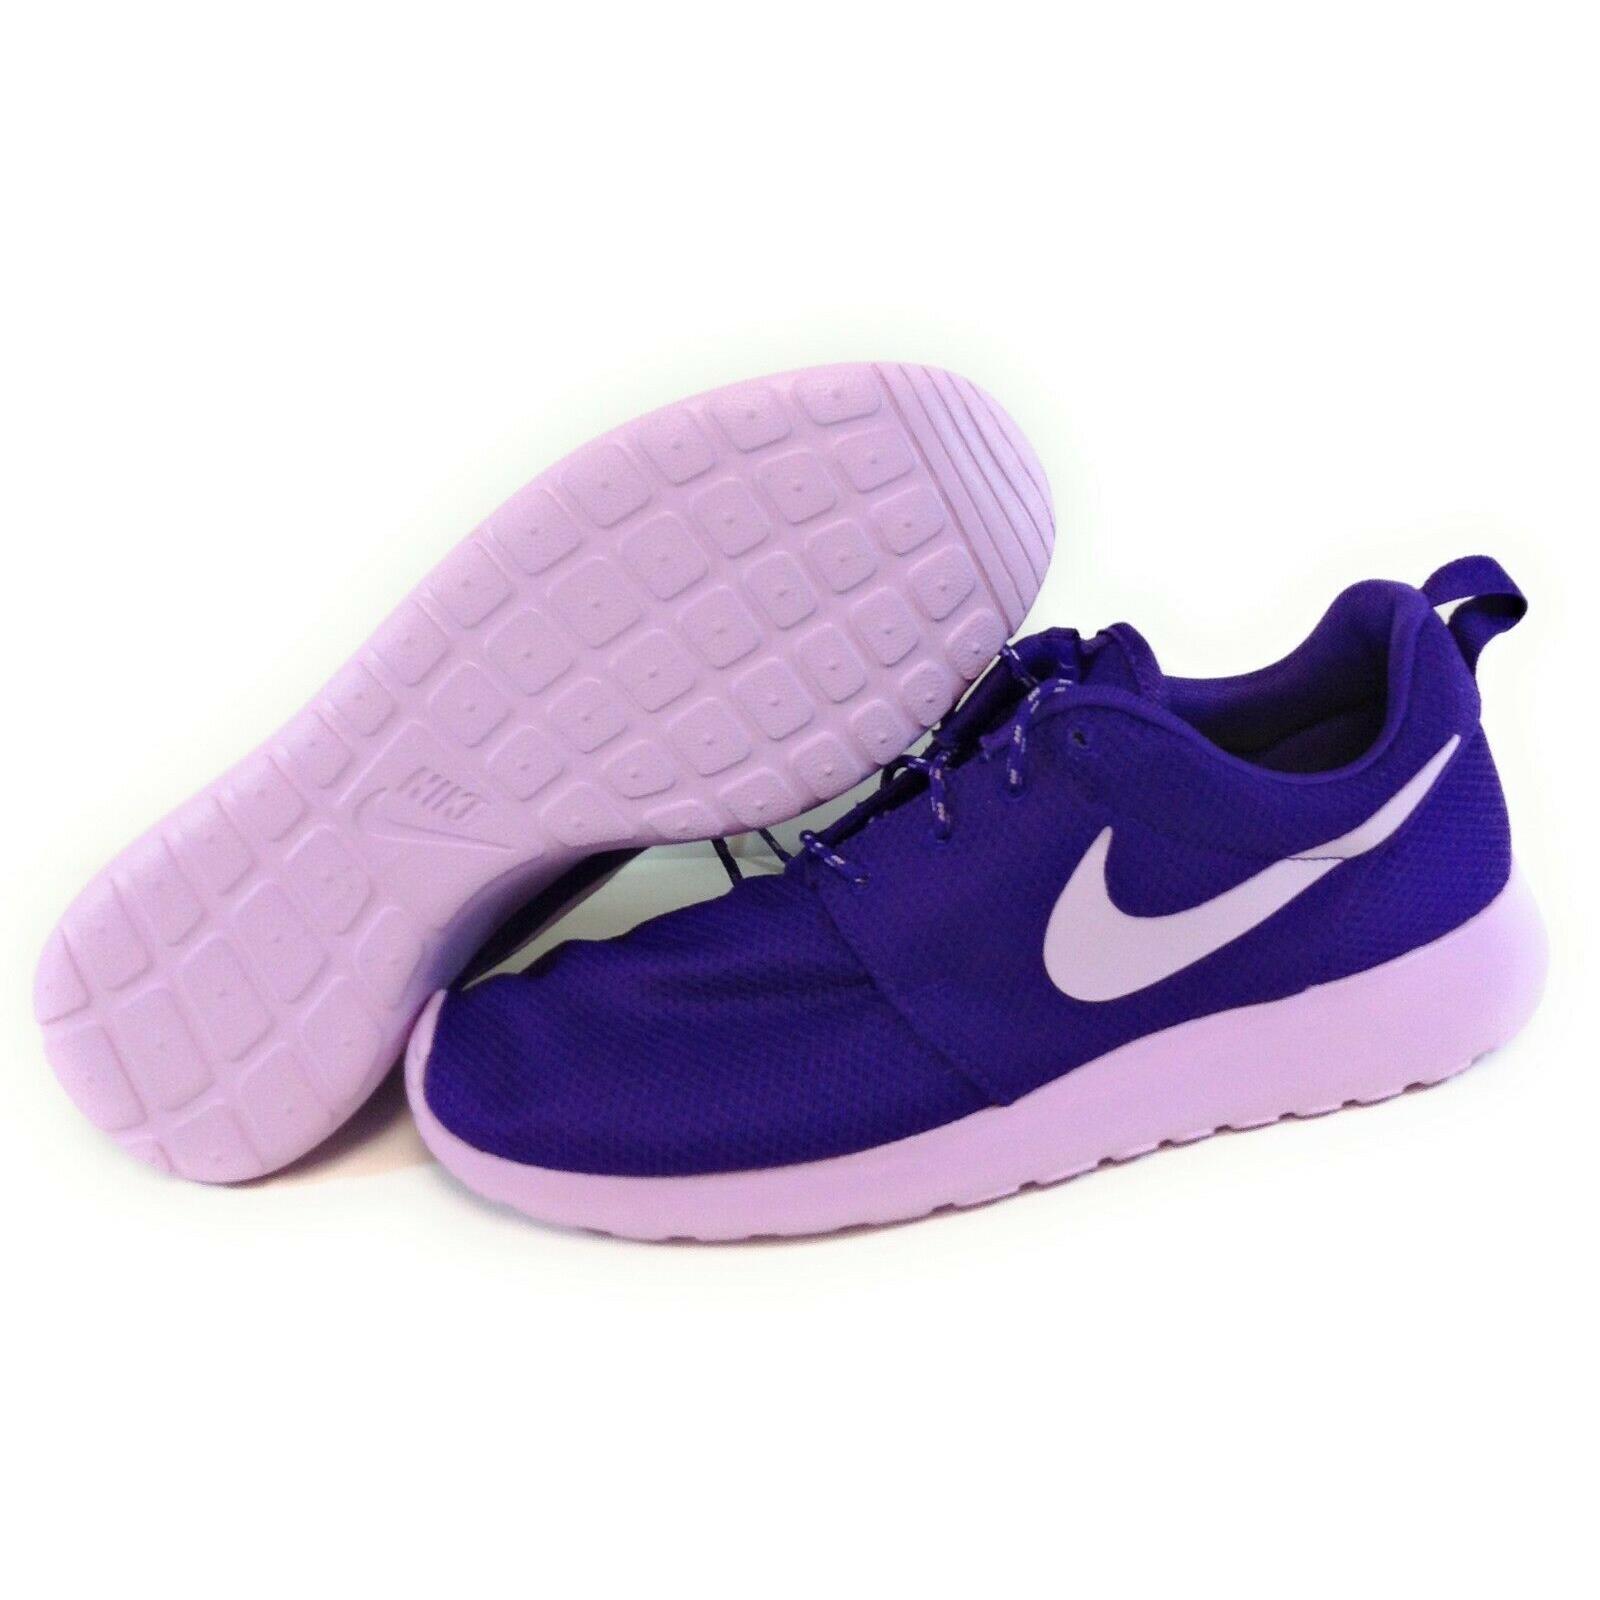 Womens Nike Rosherun 511882 503 Court Purple Violet 2012 DS Sneakers Shoes